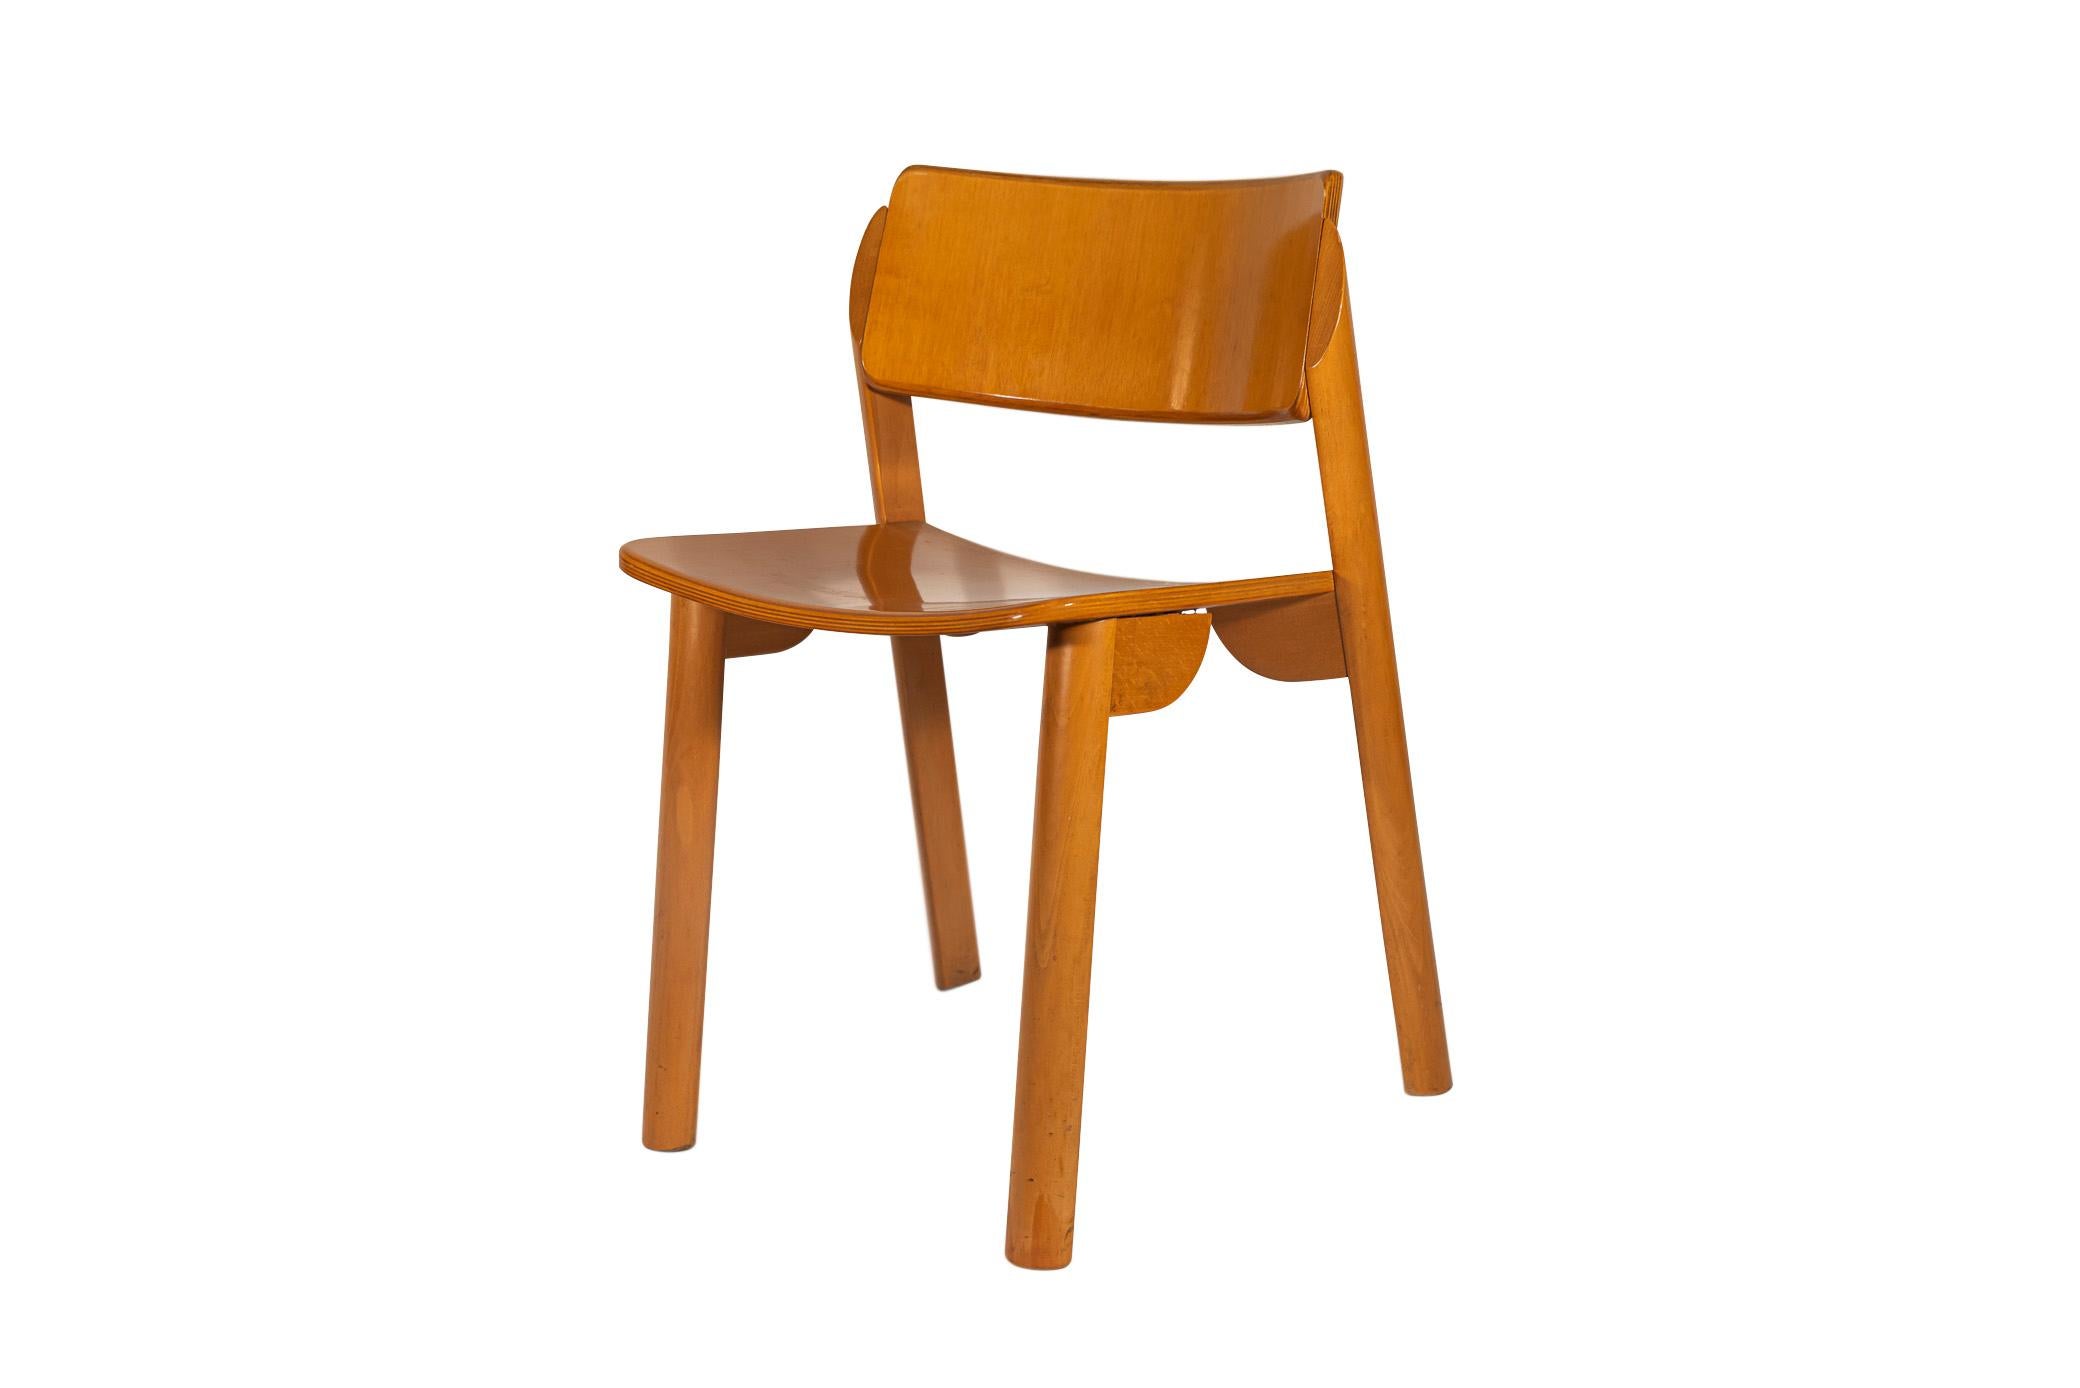 Set of four chairs,
molded and veneered wood,
France, circa 1960.

Measures: Height 73 cm, width 50 cm, depth 43 cm, seat height 41 cm.